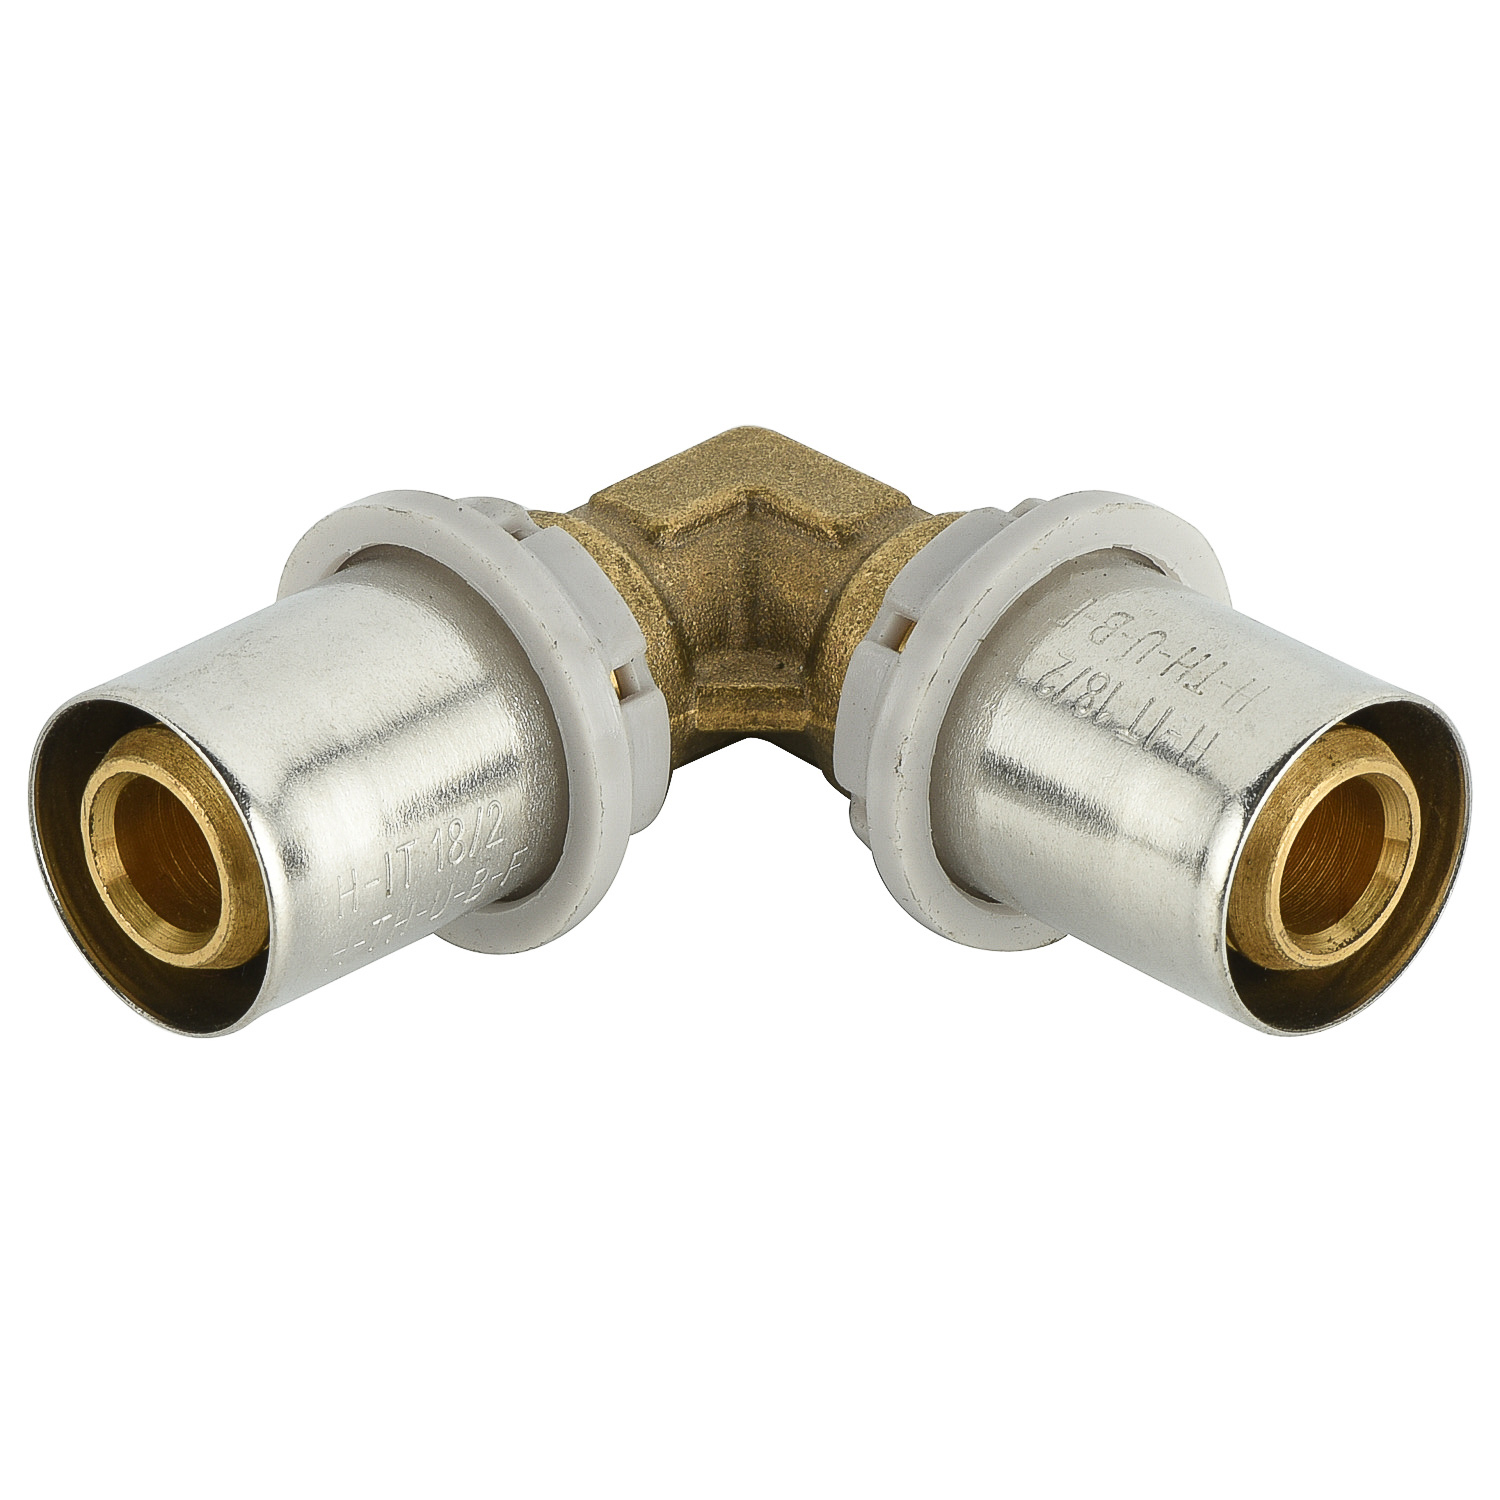 brass u type press striaight male connector fittings for plumbing heating multiayer pex al pex pipe